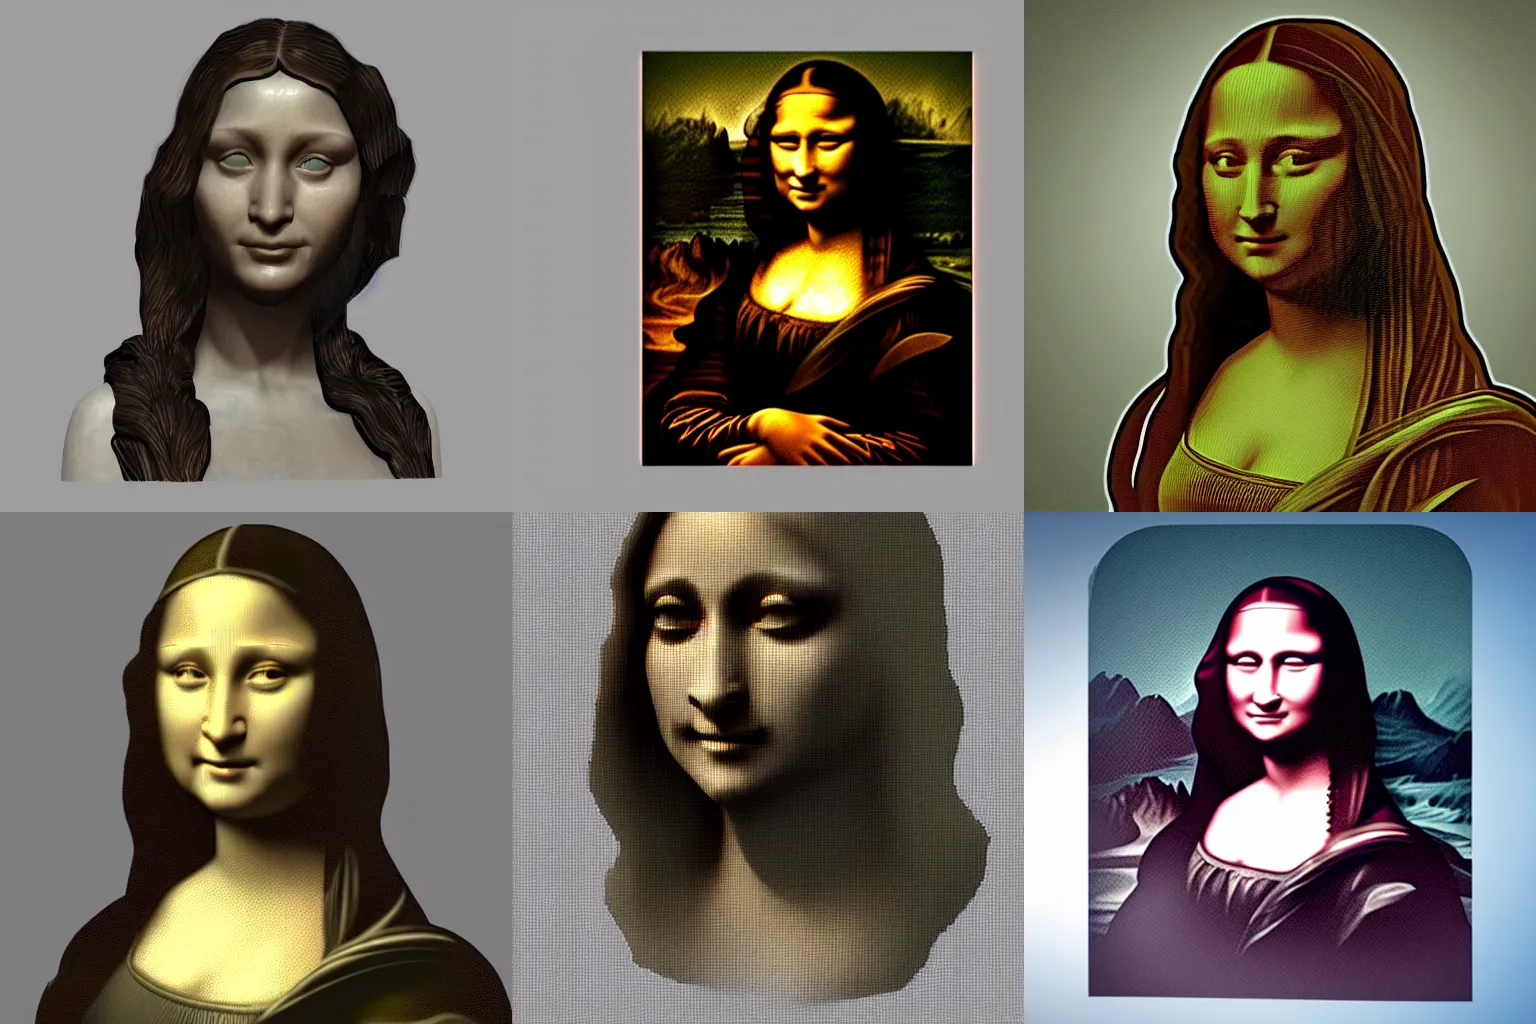 Prompt: 3 d model of a character in a video game, light and shadow effects, art station, atmospheric lighting, looks like ( mona lisa )